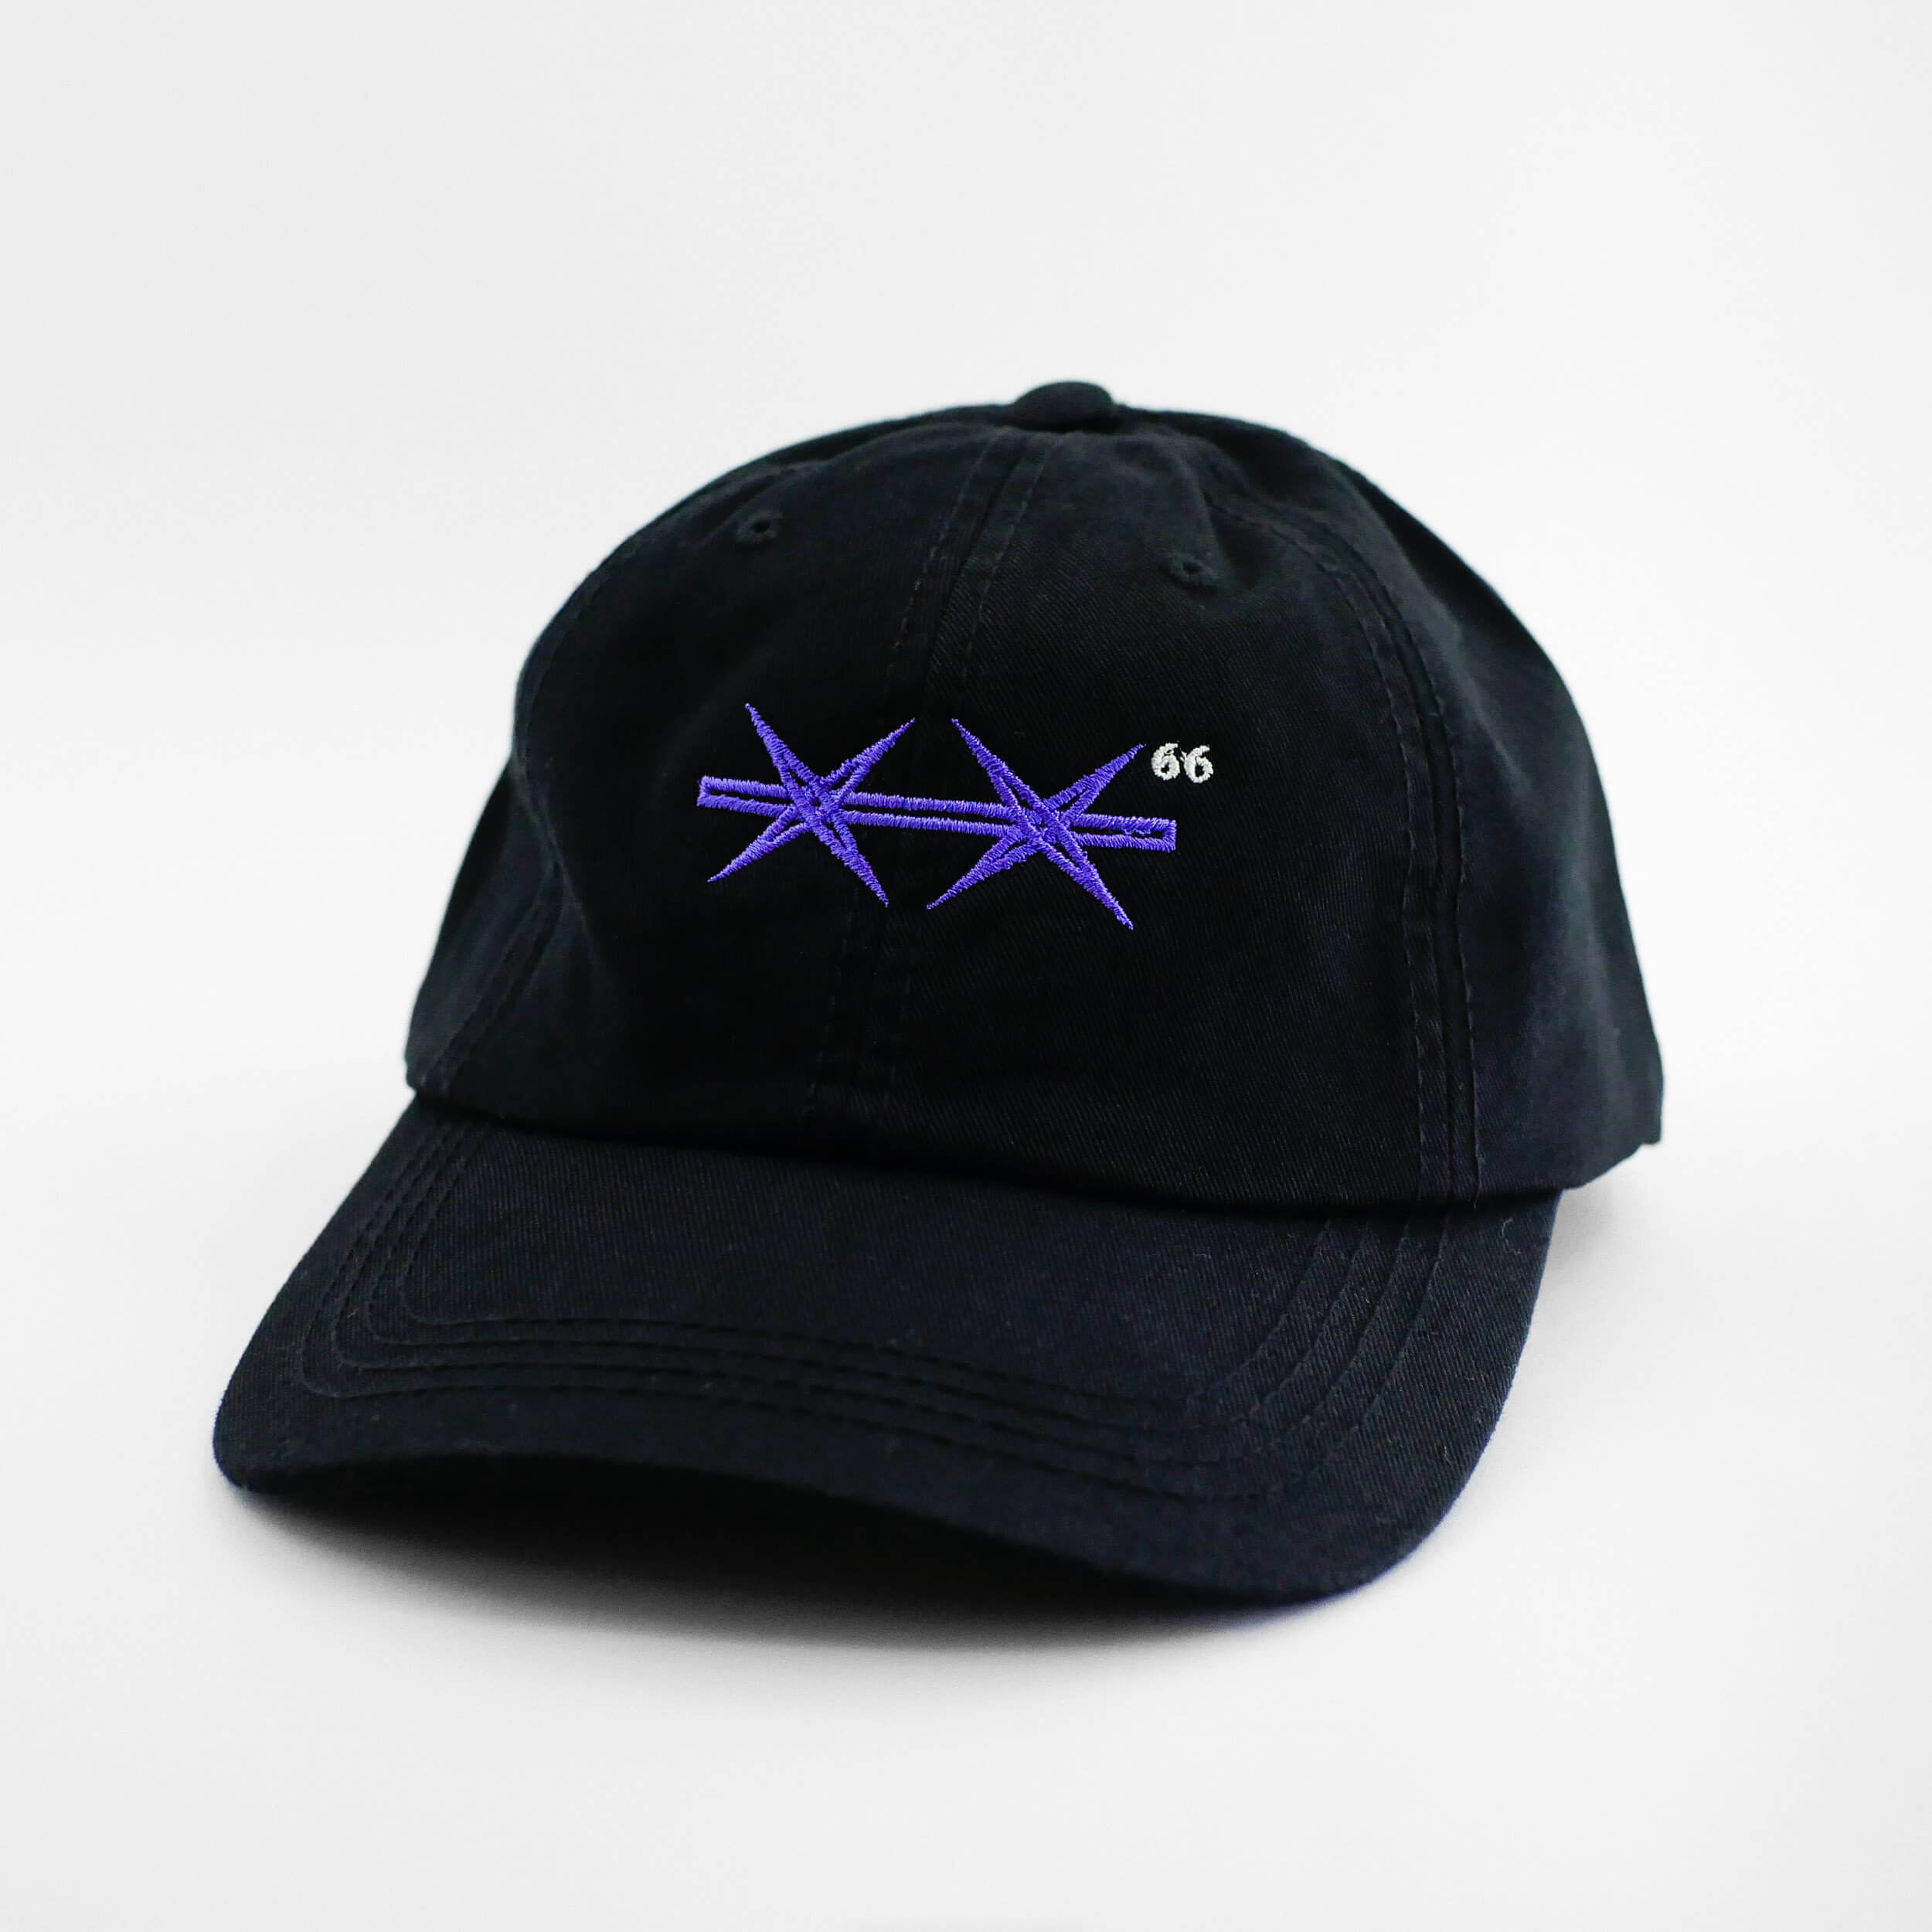 Angle view of the embroidered Barbed Wire black dad hat from PHOSIS Clothing